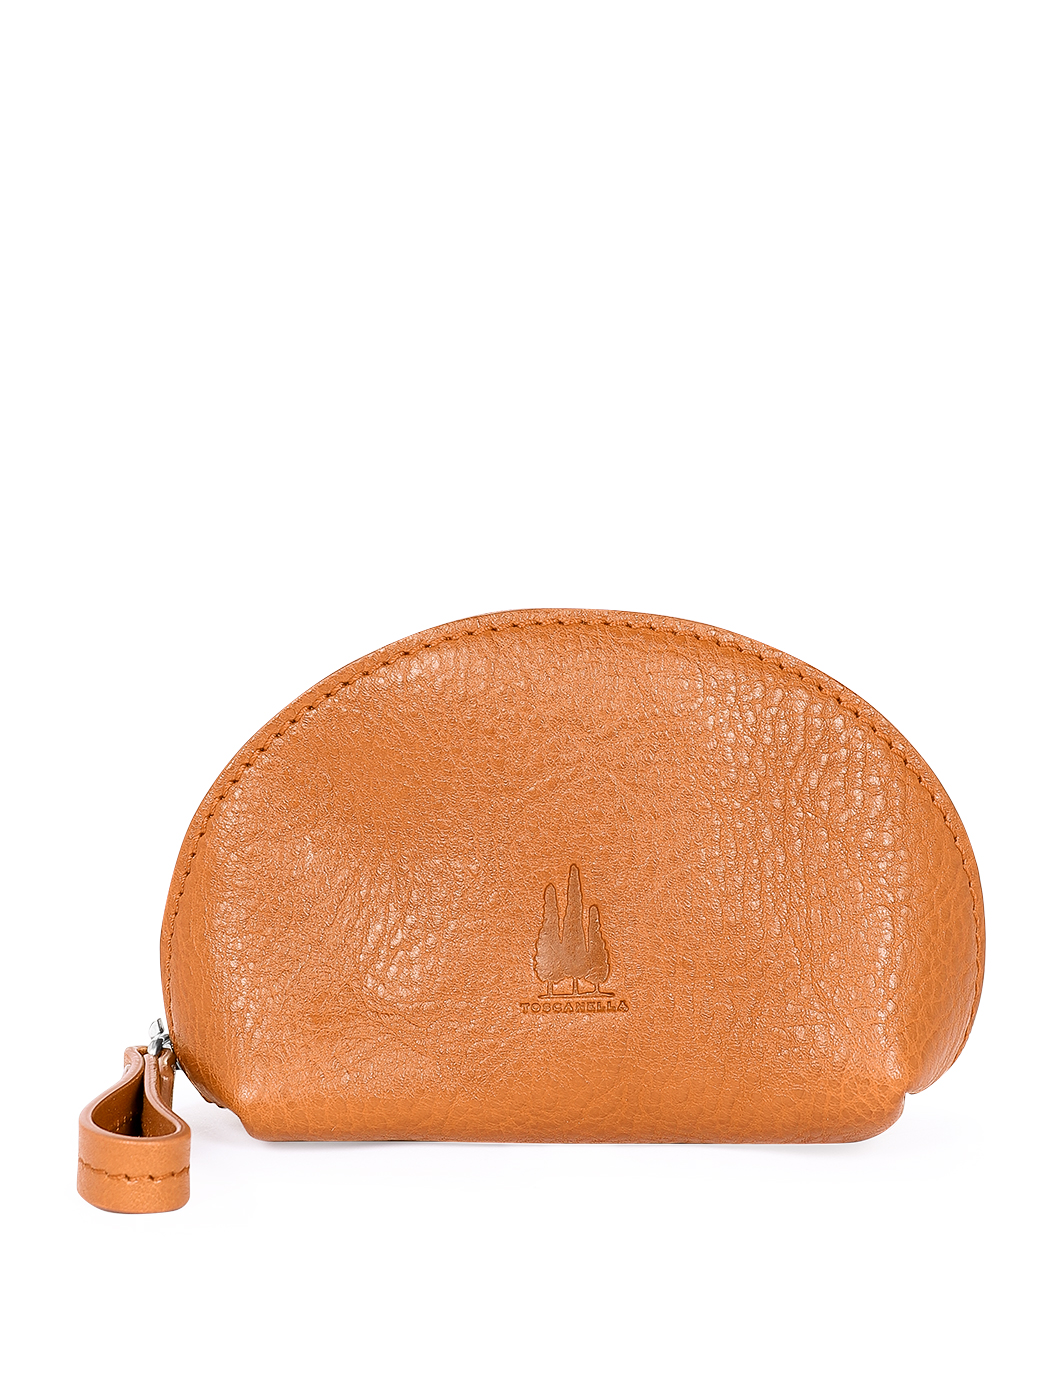 Women's Clamshell Hold-all Pouch in Leather Tobacco